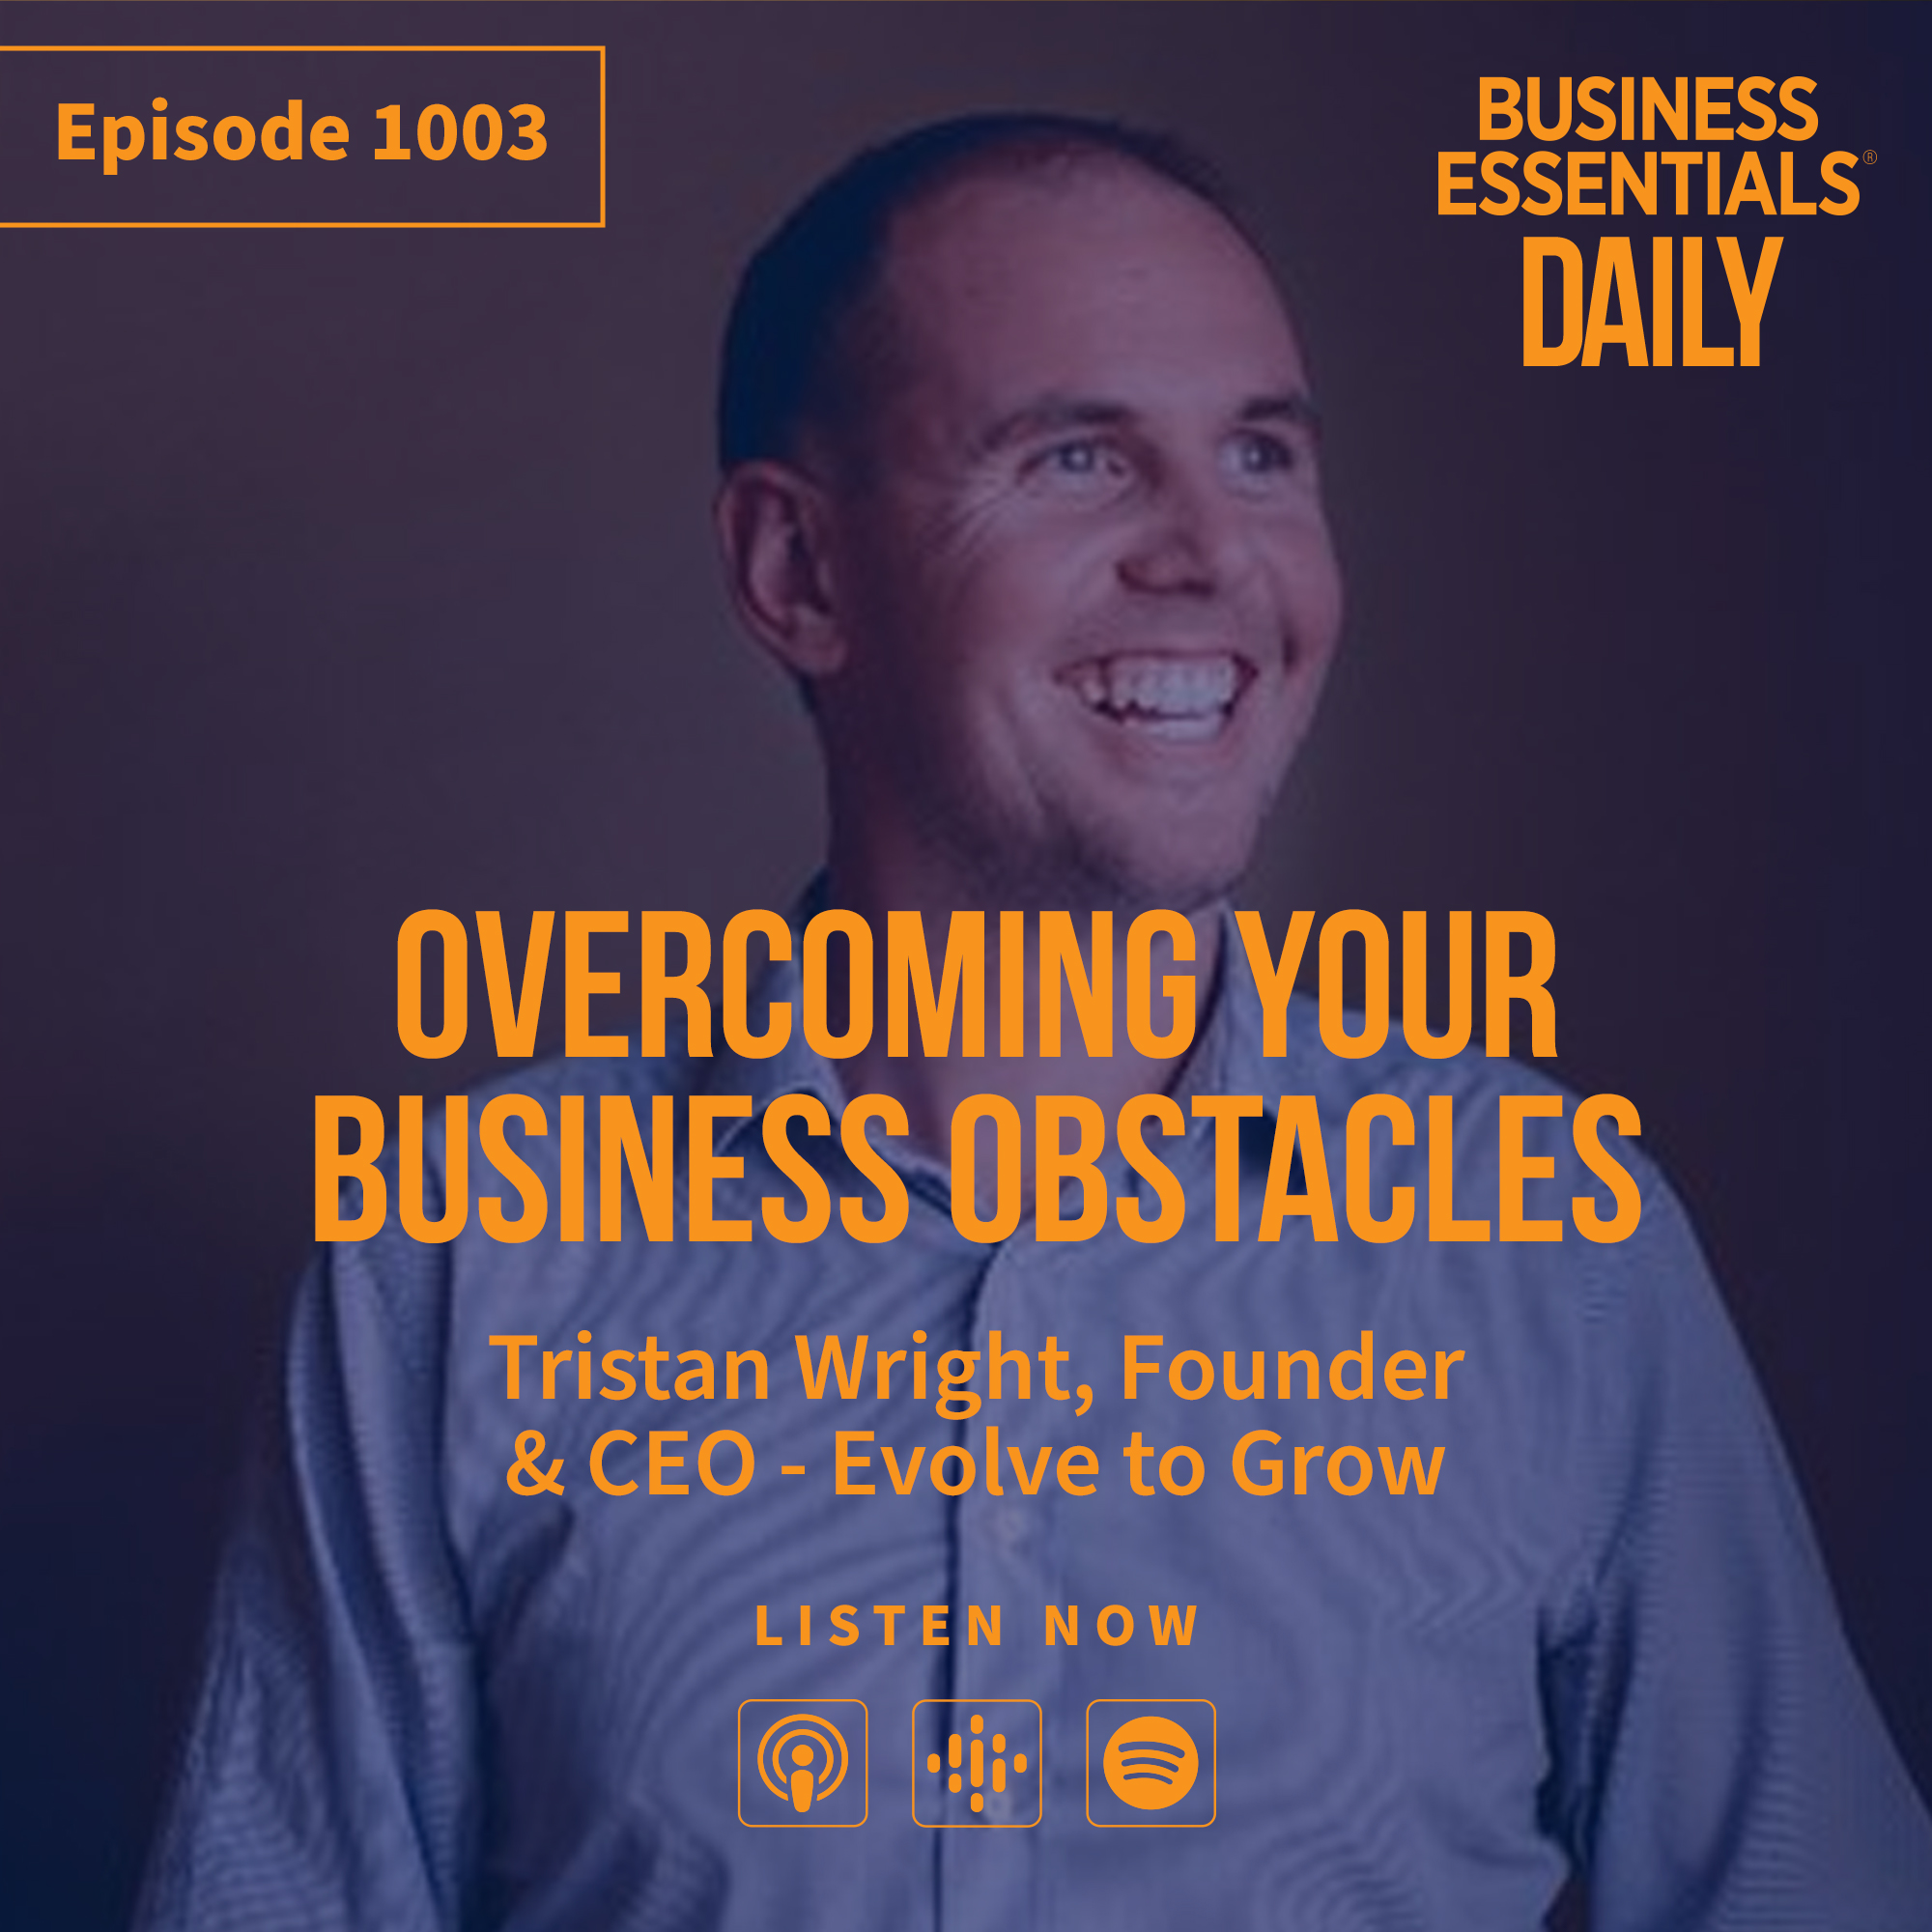 Overcoming your business obstacles